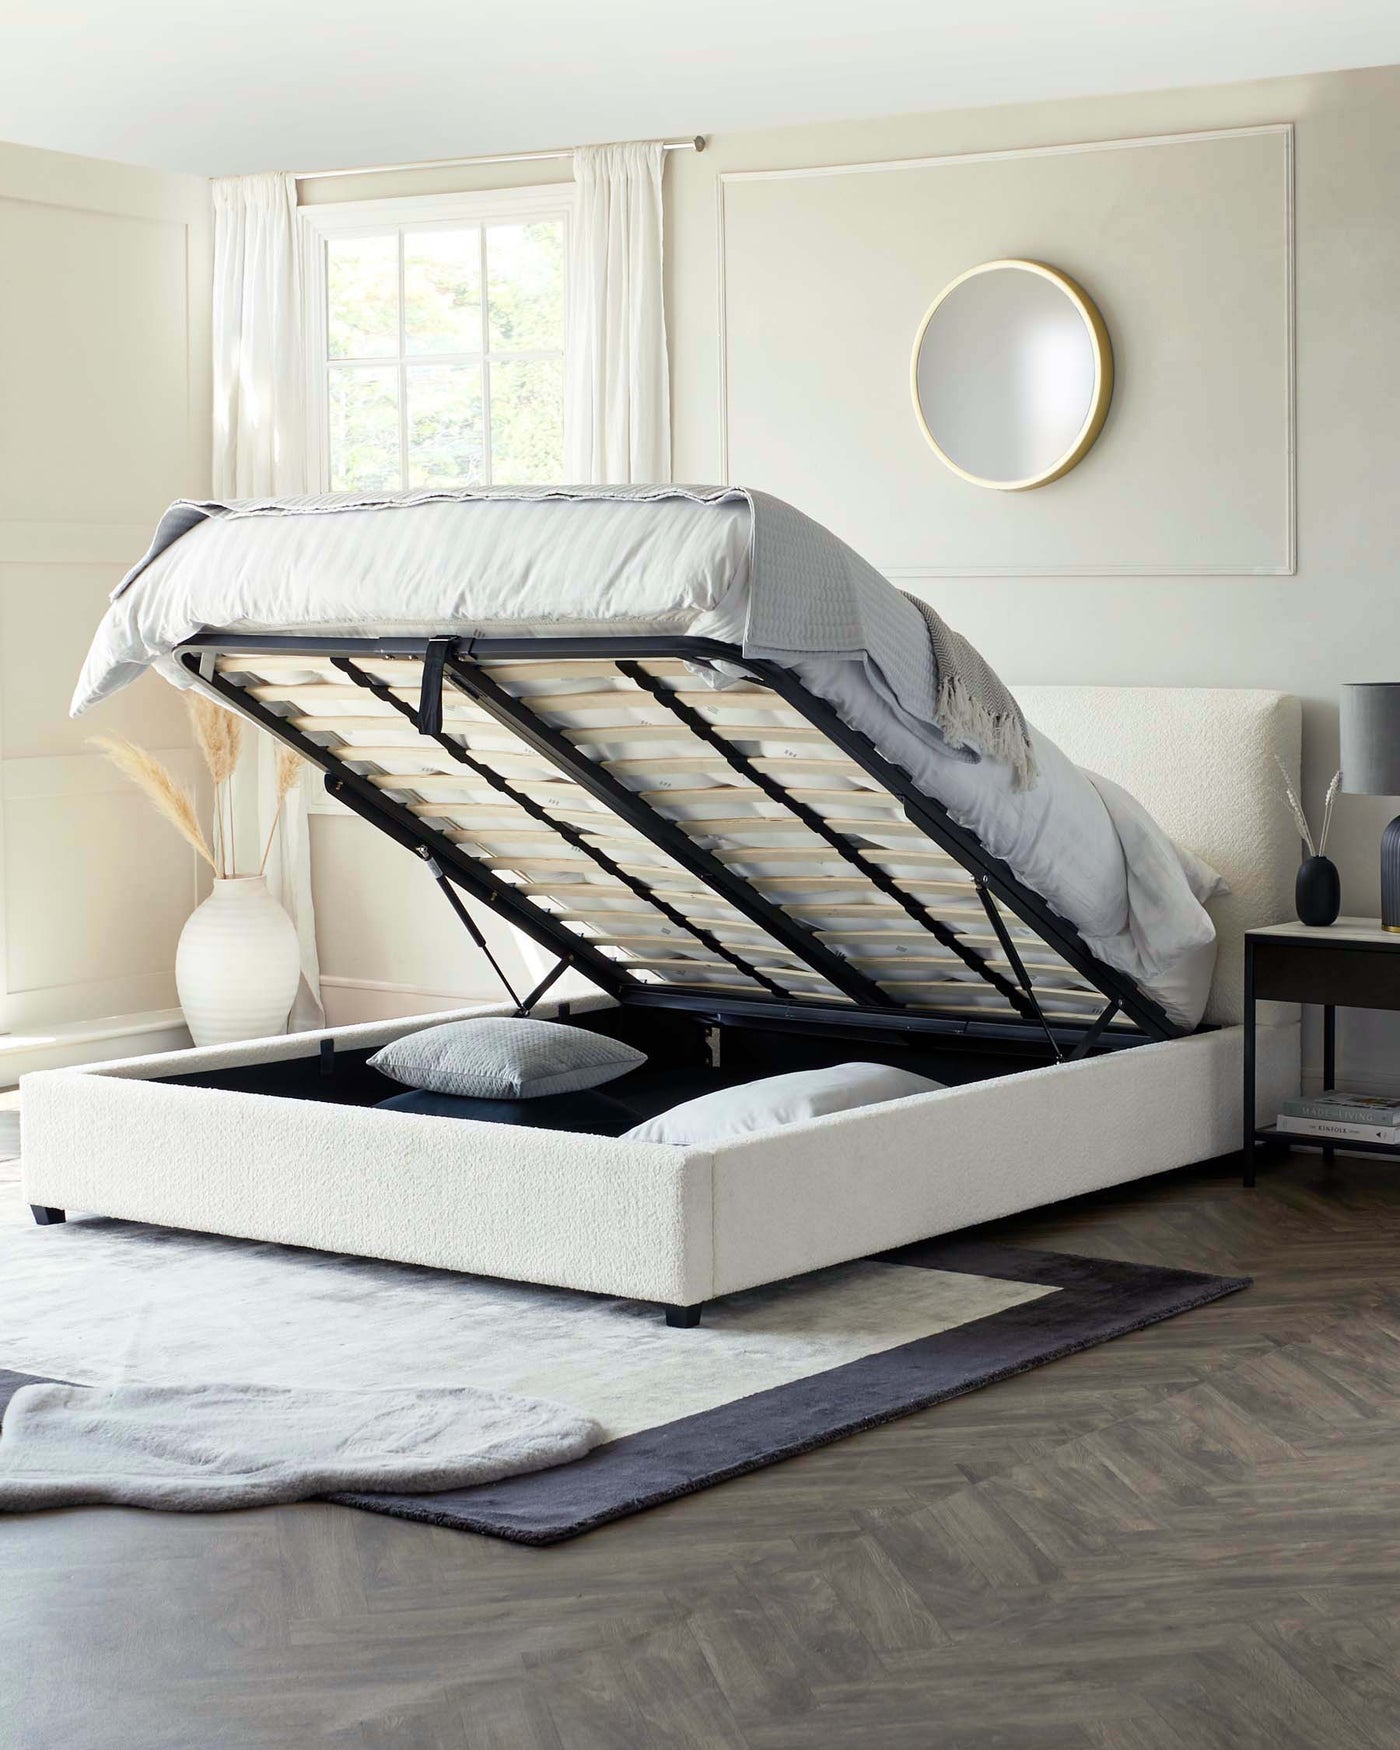 Modern upholstered storage bed with a raised mattress platform revealing a spacious under-bed storage area, set in a contemporary bedroom setting.